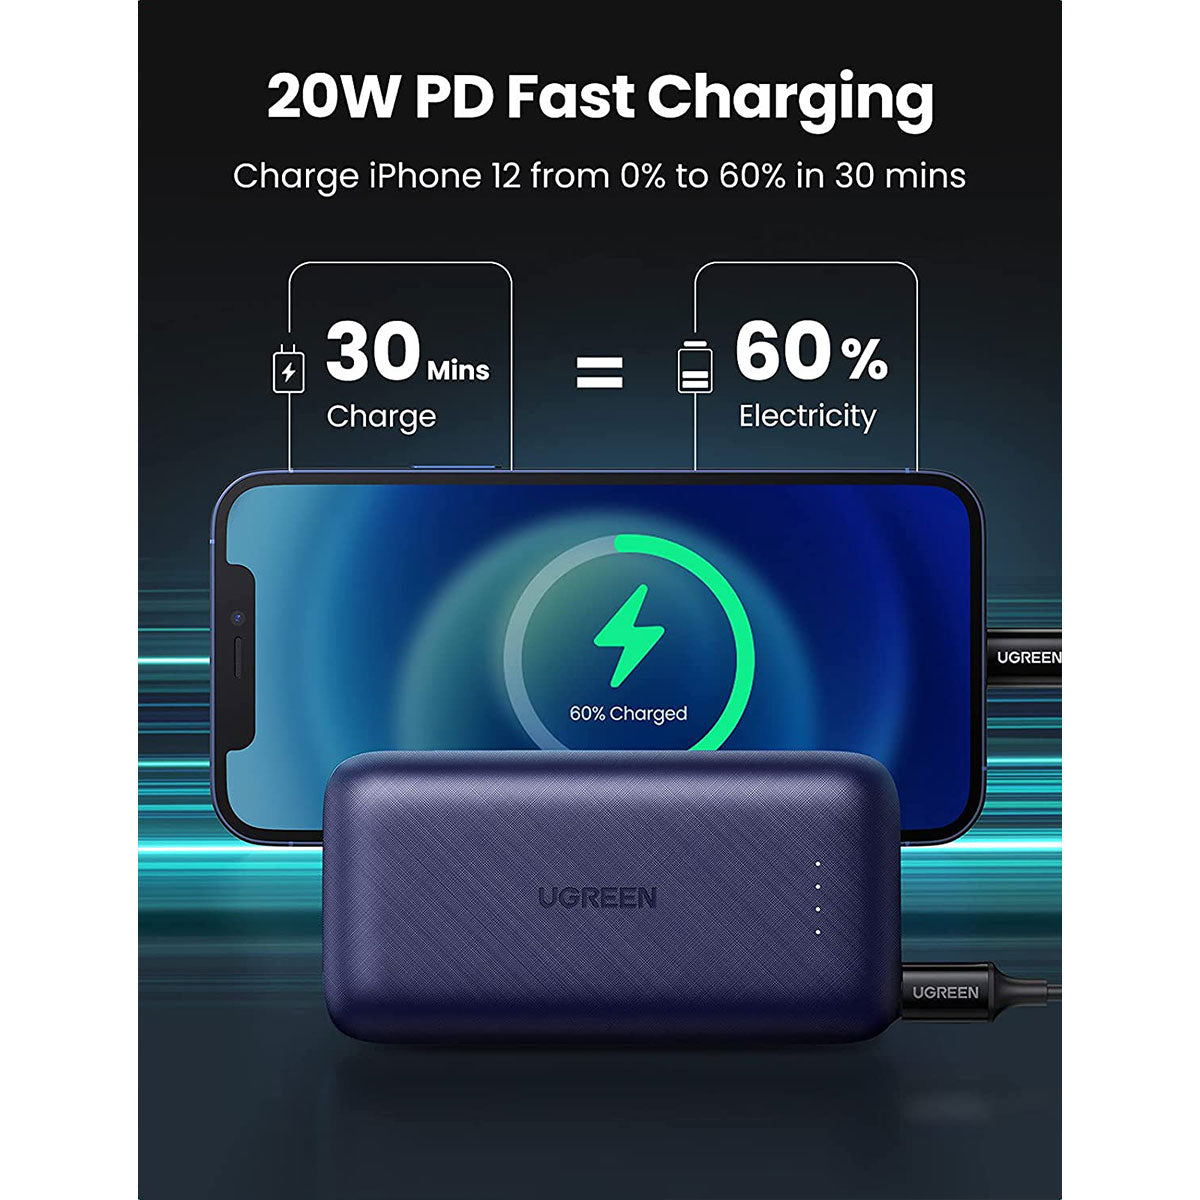 UGREEN 10000mAh Power Bank PD 20W with Lightning Cable 可攜式充電器《預訂》 充電器 Microworks Online Store